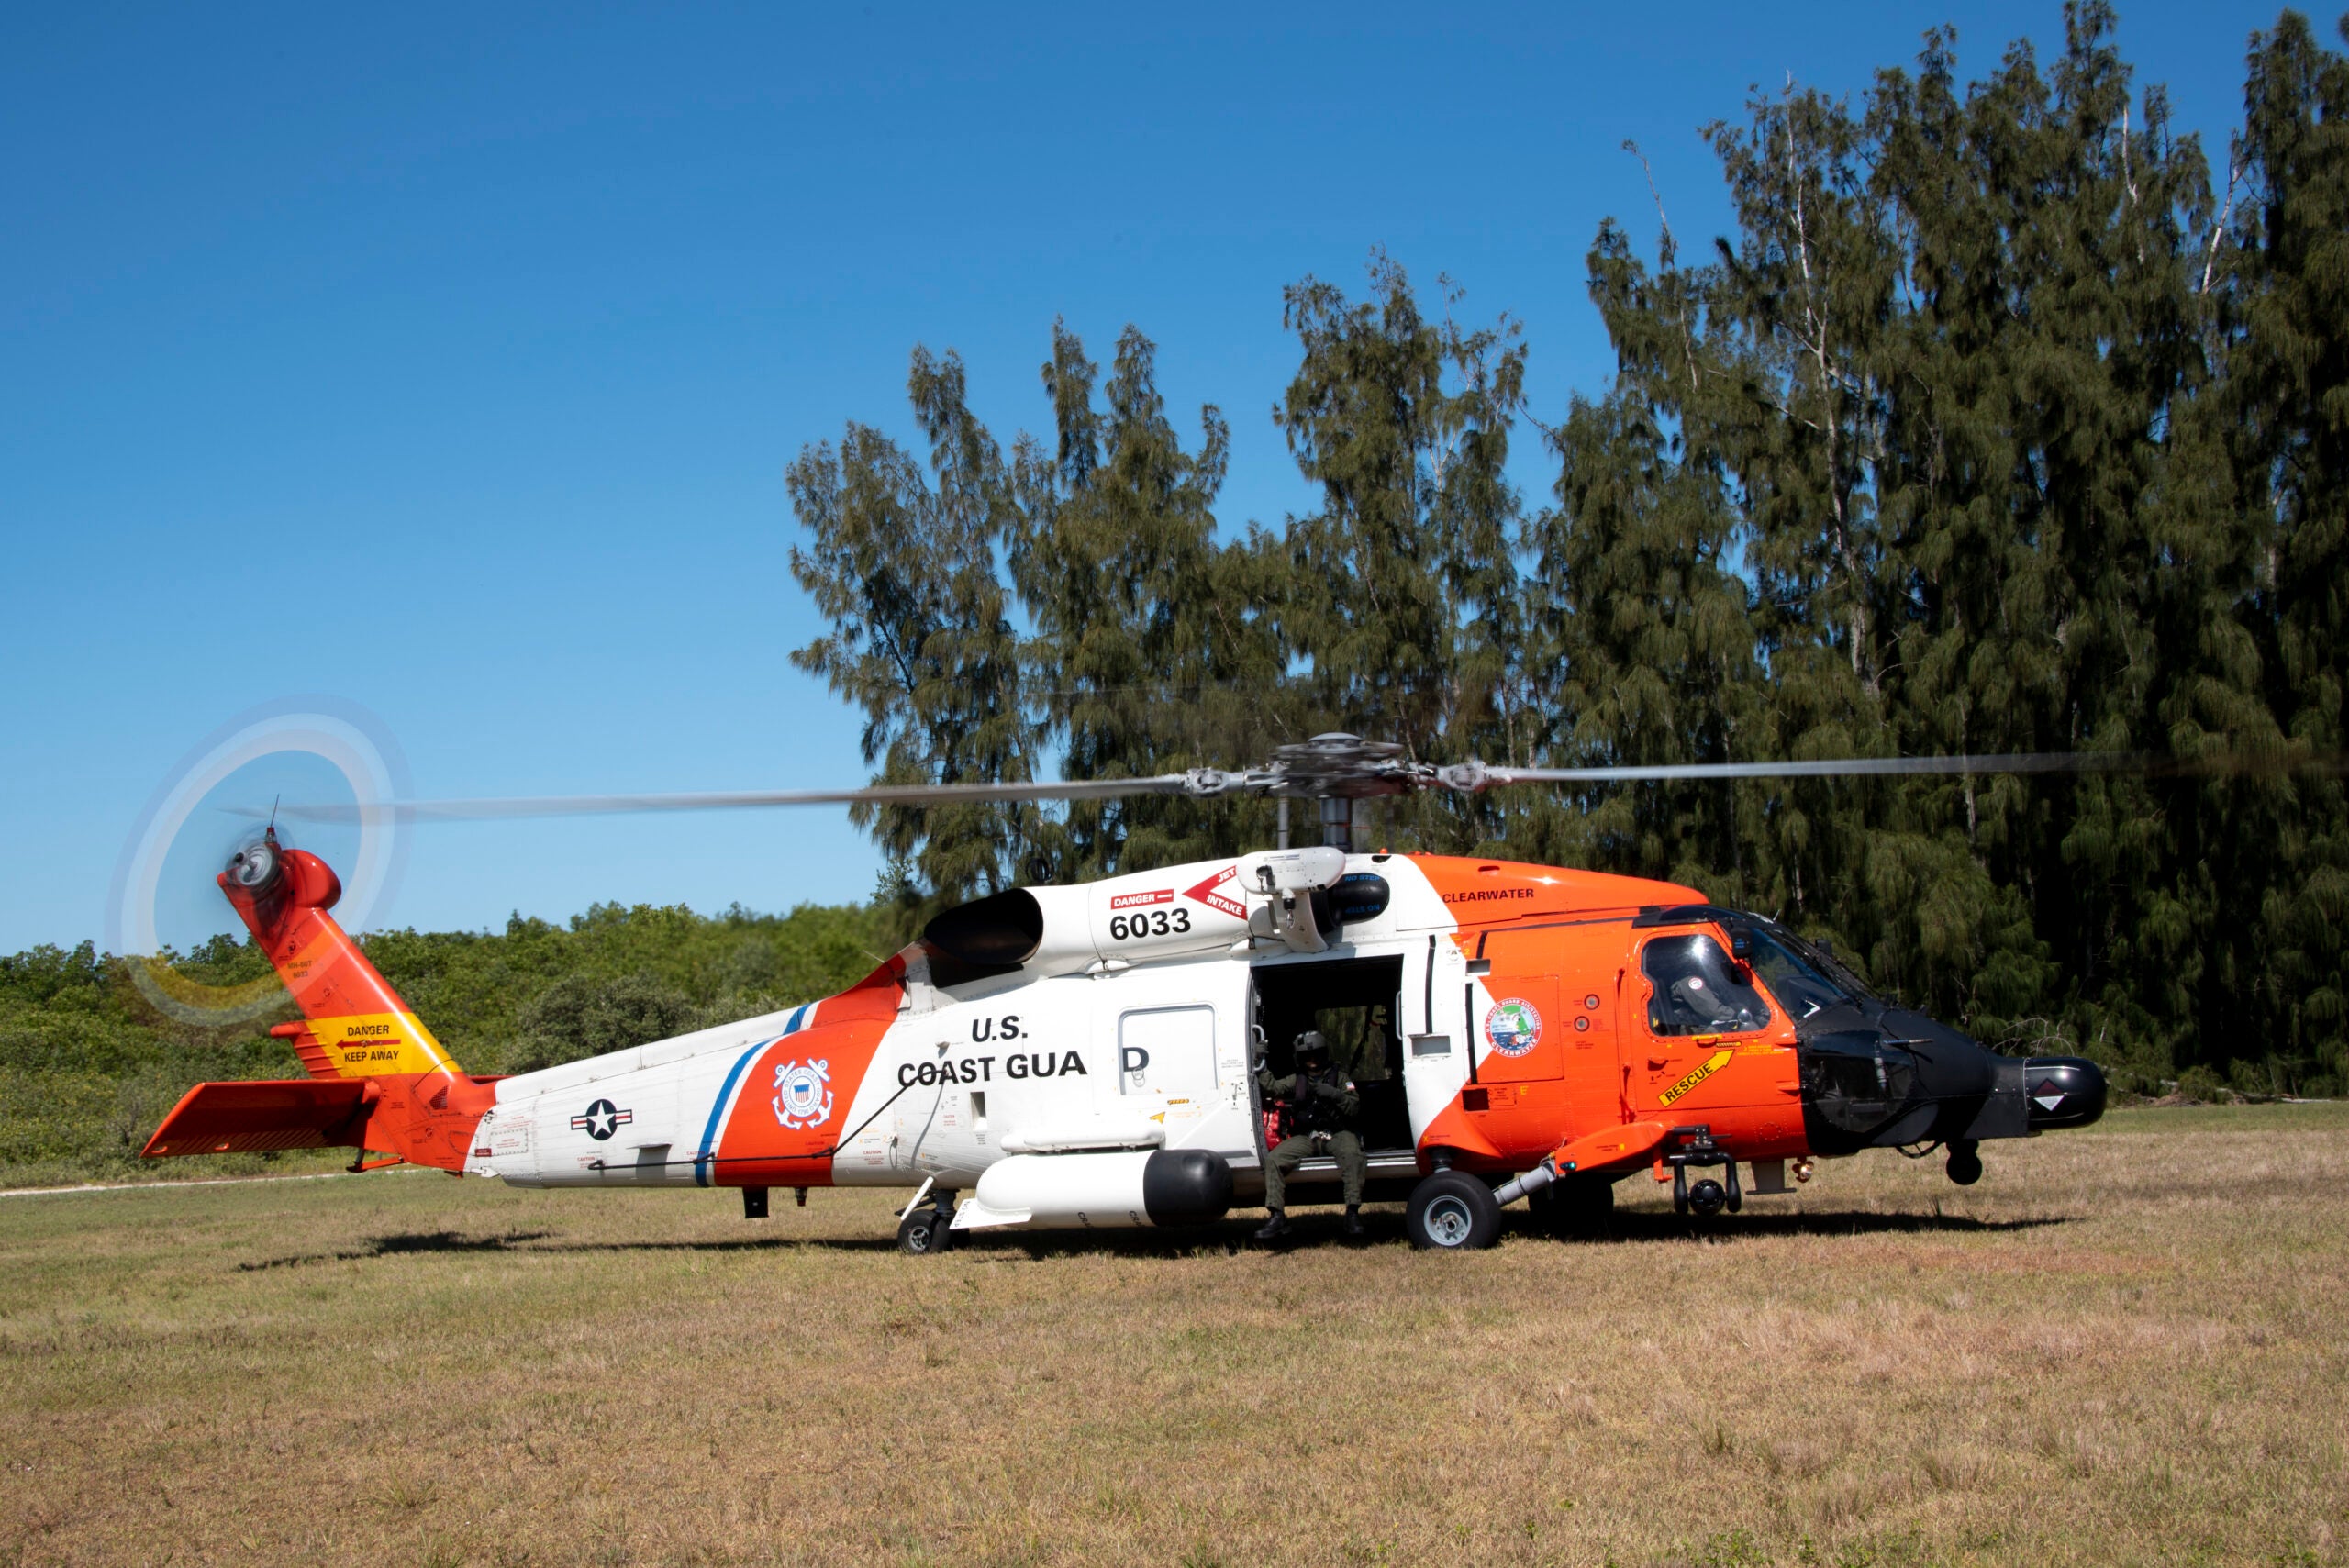 An MH-60T crew from Coast Guard Air Station Clearwater conducts training exercises, MacDill Air Force Base, Florida, May 14, 2021. The crews practiced a variety of drills, part of their  rigorous training to keep their qualifications current and ensure they are prepared for a variety of scenarios they could encounter. (Coast Guard photo by Petty Officer 1st Class Lisa Ferdinando)